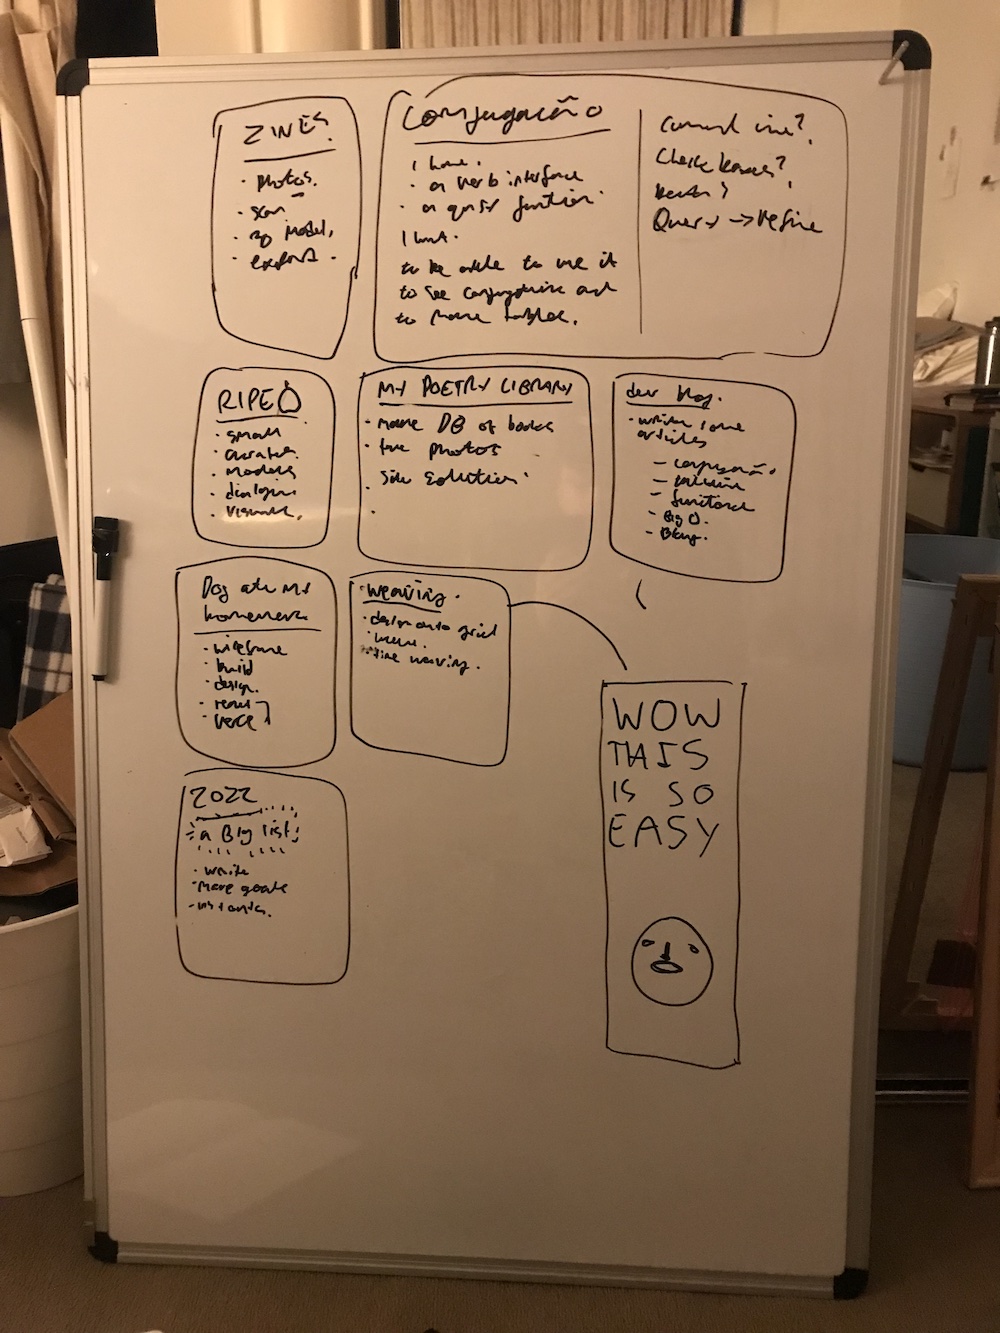 a whiteboard with a bunch of projects listed on it in messy handwriting, and the text "WOW THIS IS SO EASY" next to a scribbled round face